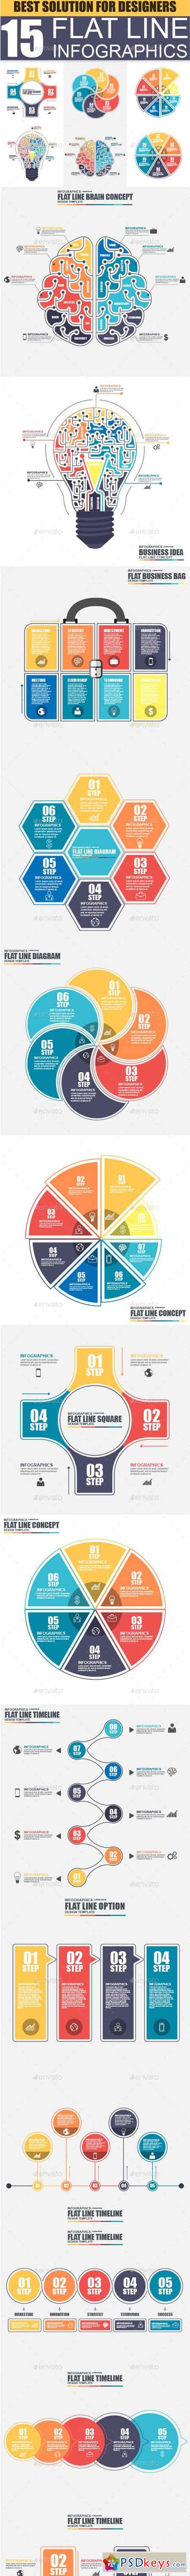 Set of Flat Line Business Infographic 18030289